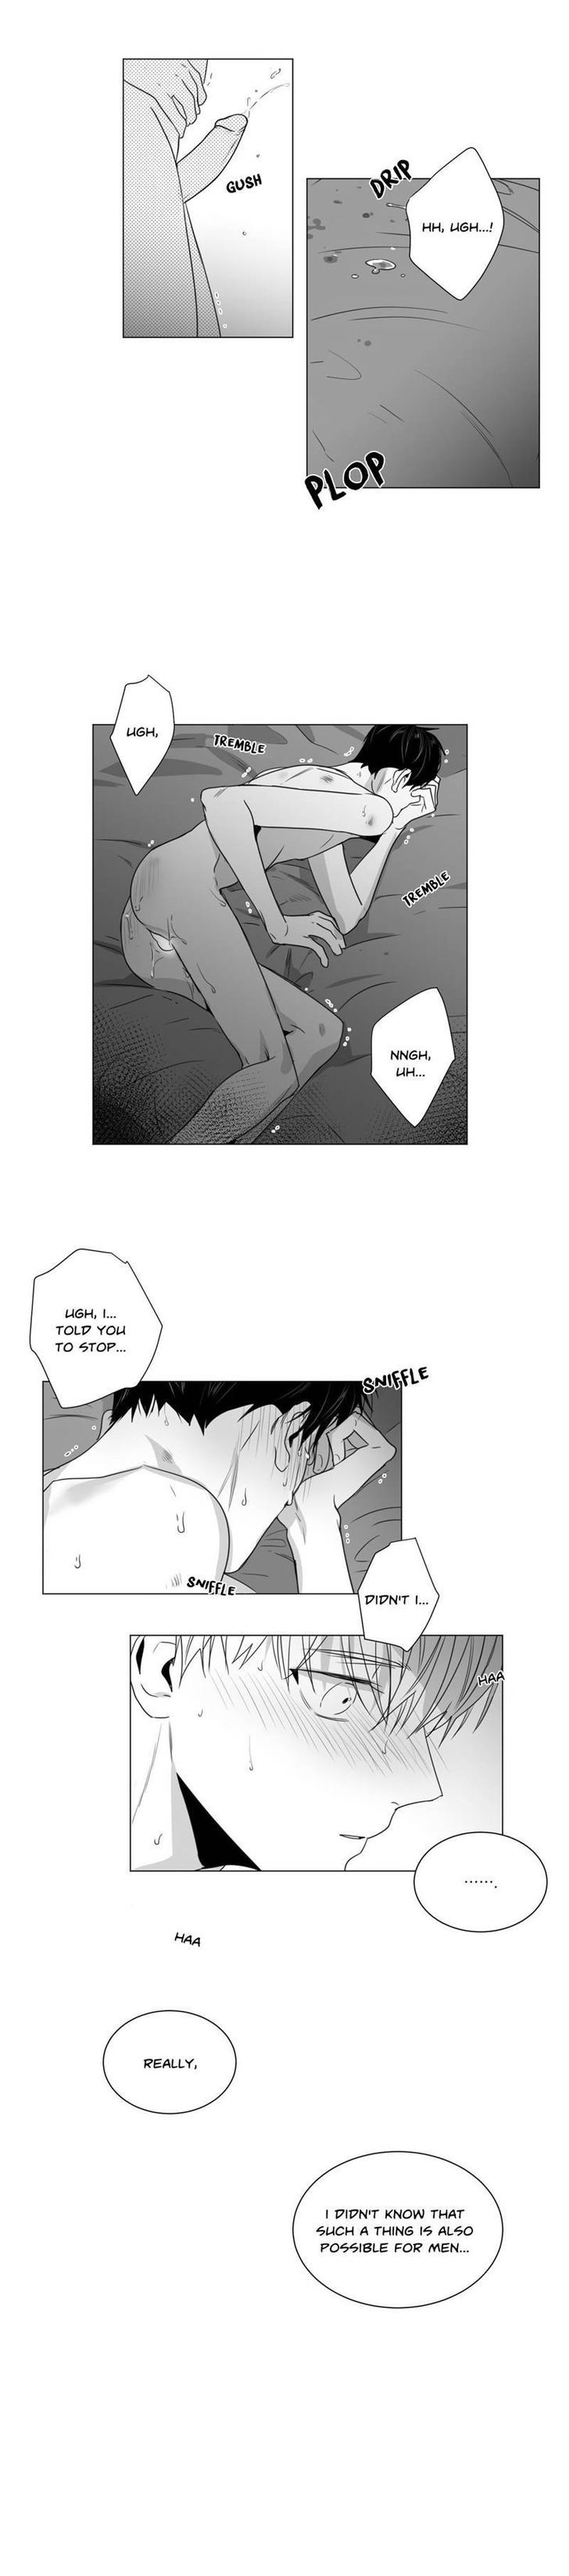 Lover Boy (Lezhin) Chapter 030 page 9